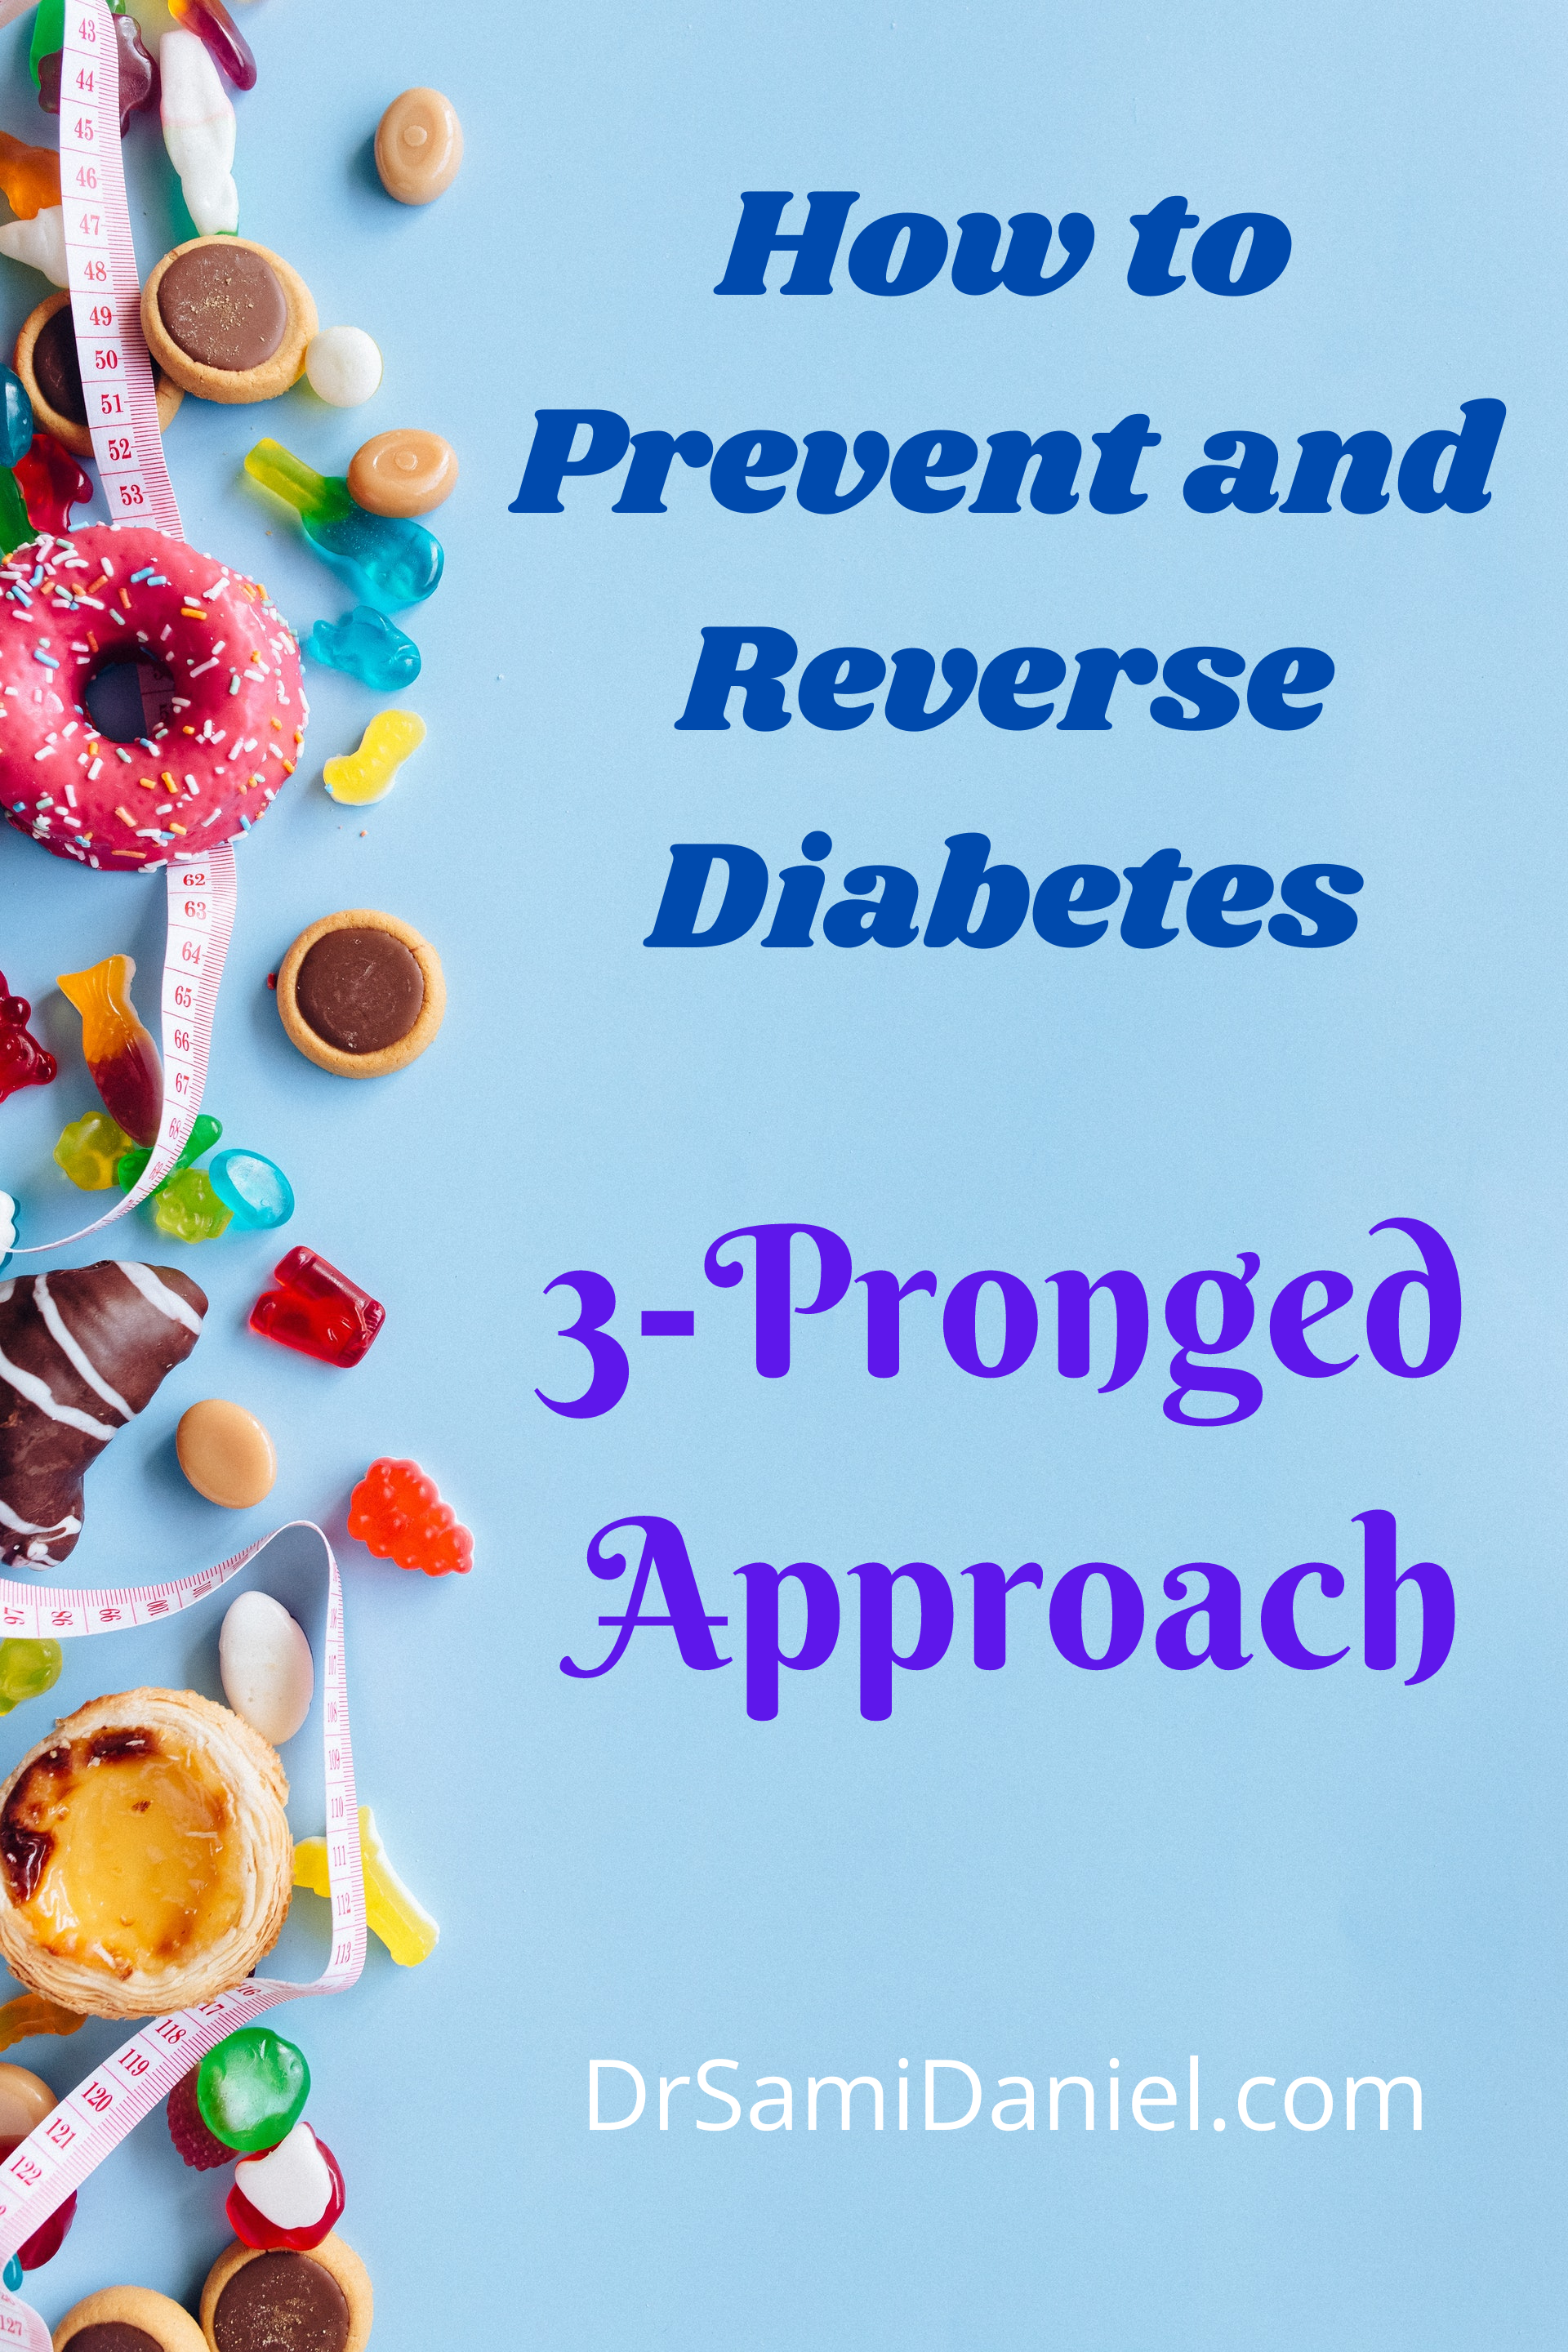 How to prevent and reverse diabetes